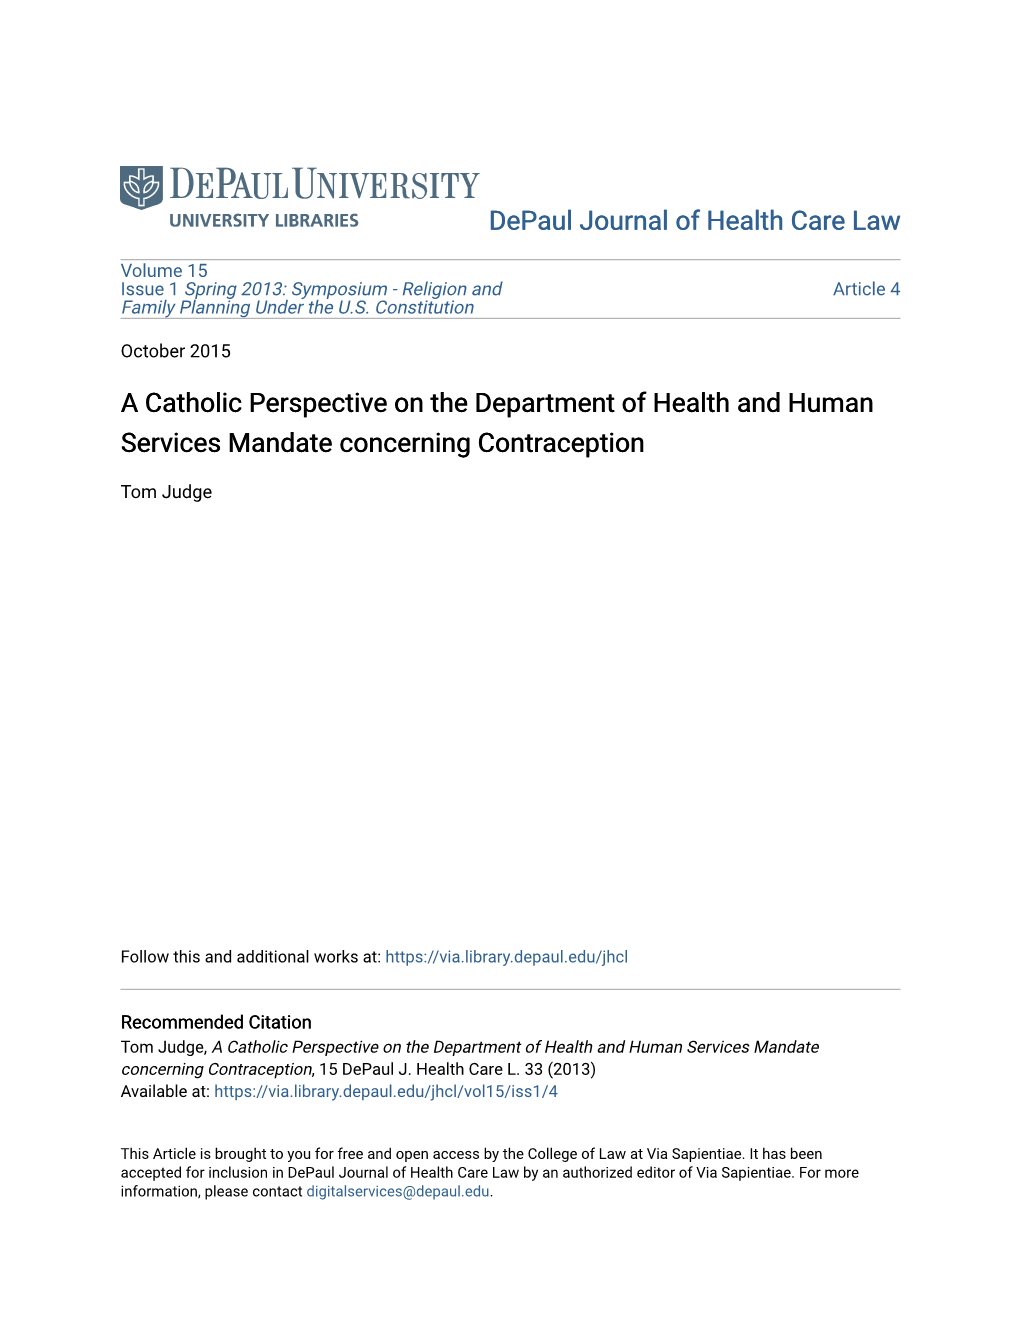 A Catholic Perspective on the Department of Health and Human Services Mandate Concerning Contraception